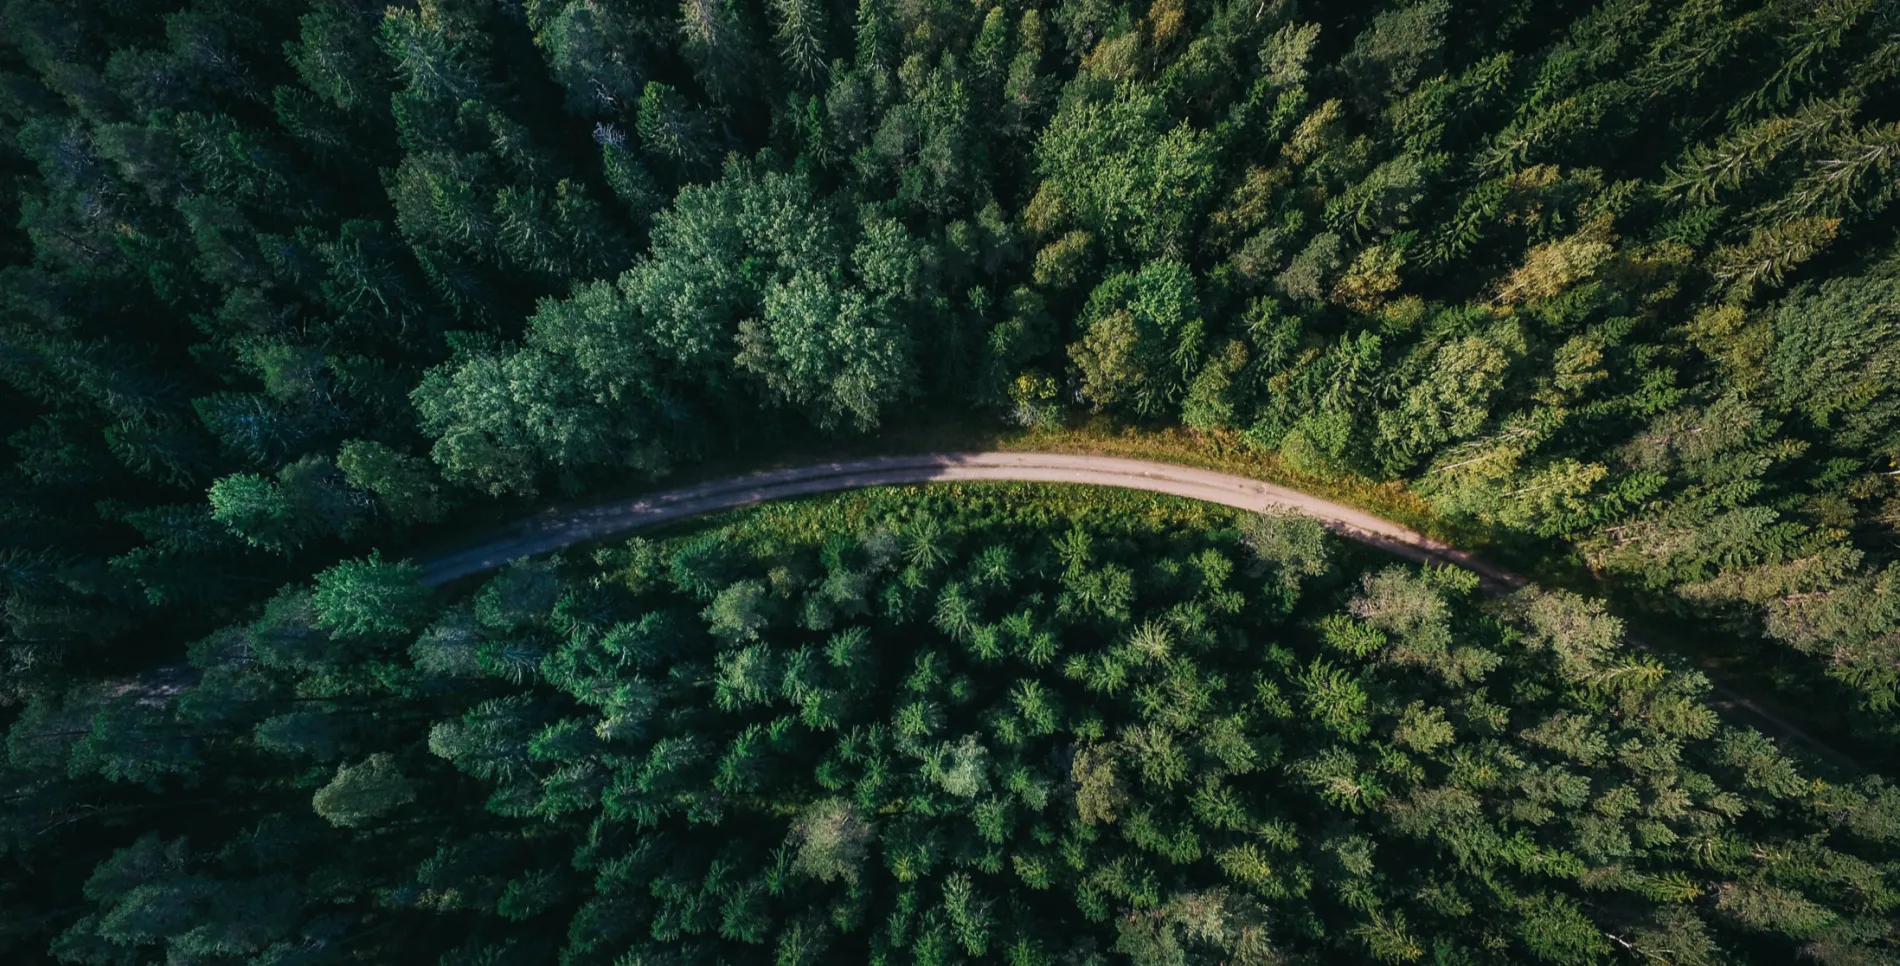 Arial view of trees with a road going through it